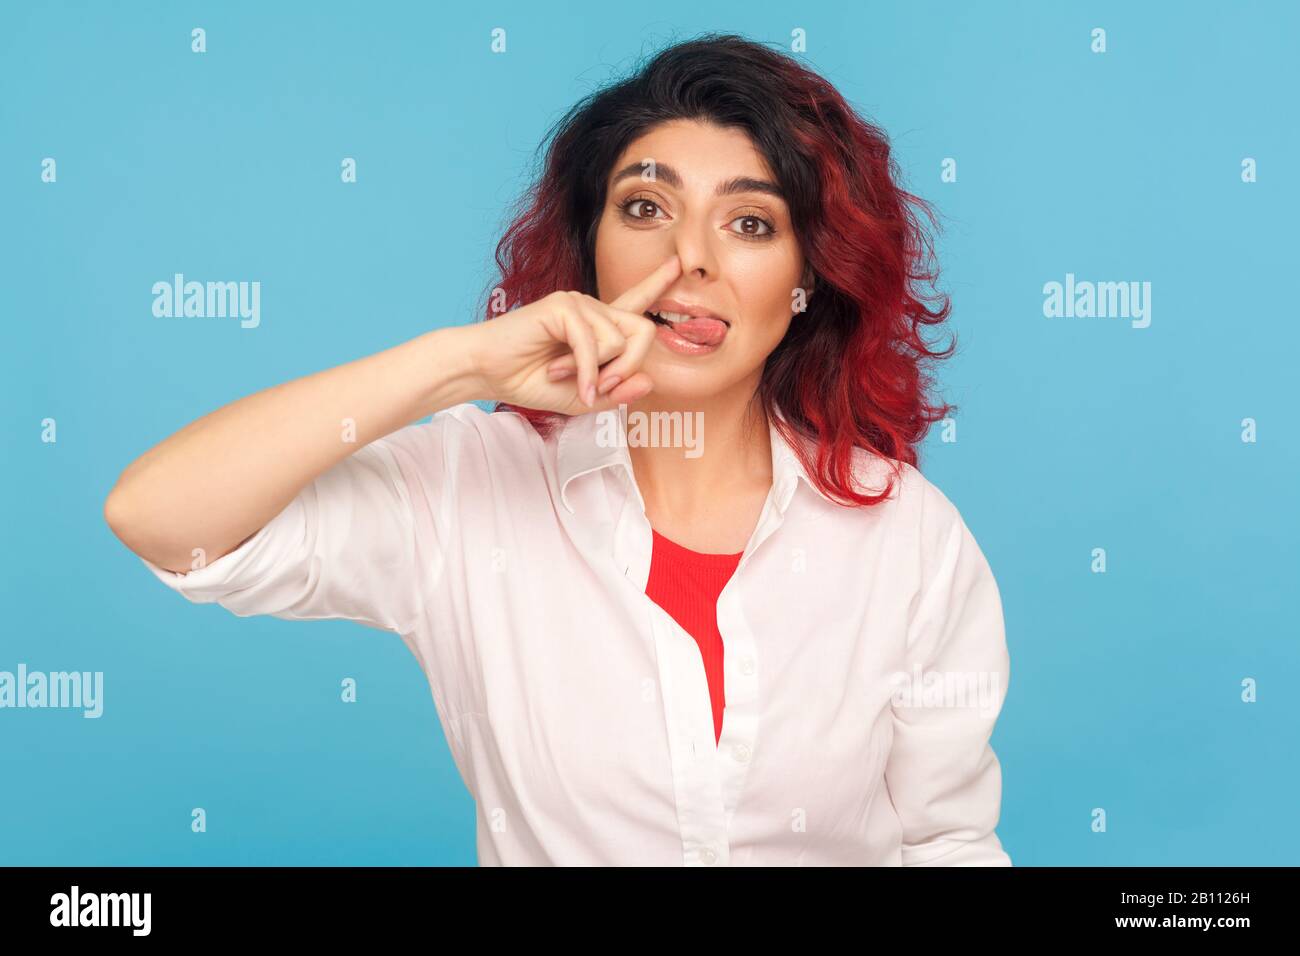 Bad manners, misconduct. Portrait of funny comical hipster woman with fancy red hair picking her nose and sticking out tongue with stupid expression. Stock Photo